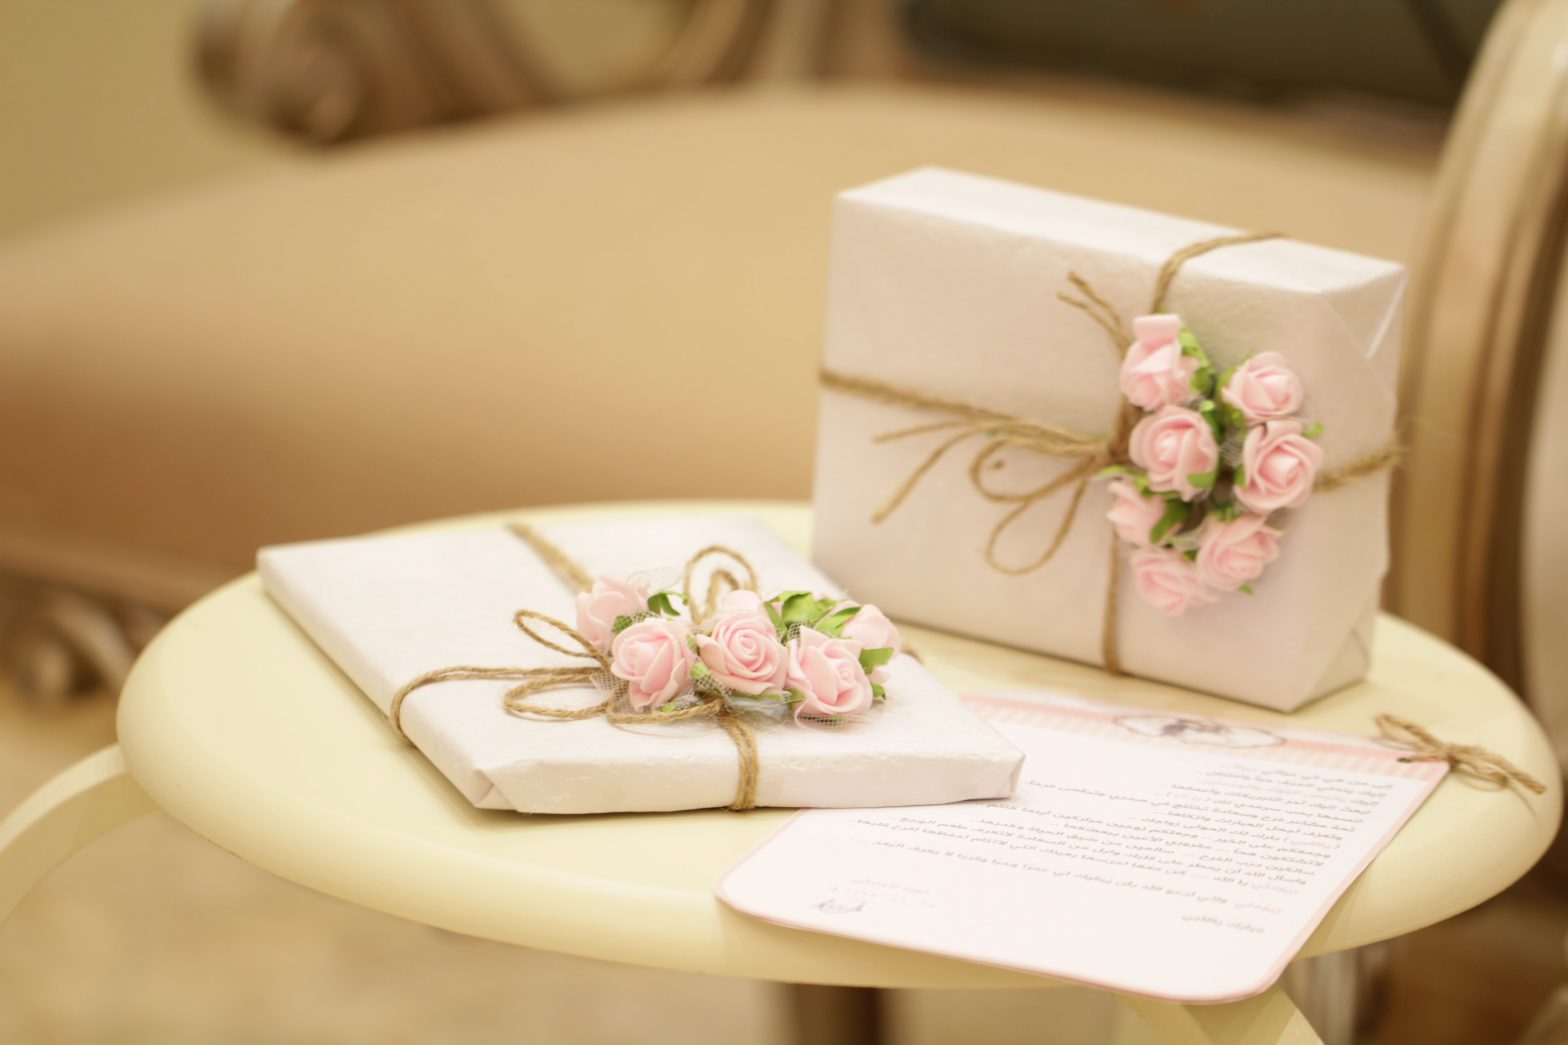 How to get the wedding gifts that you want